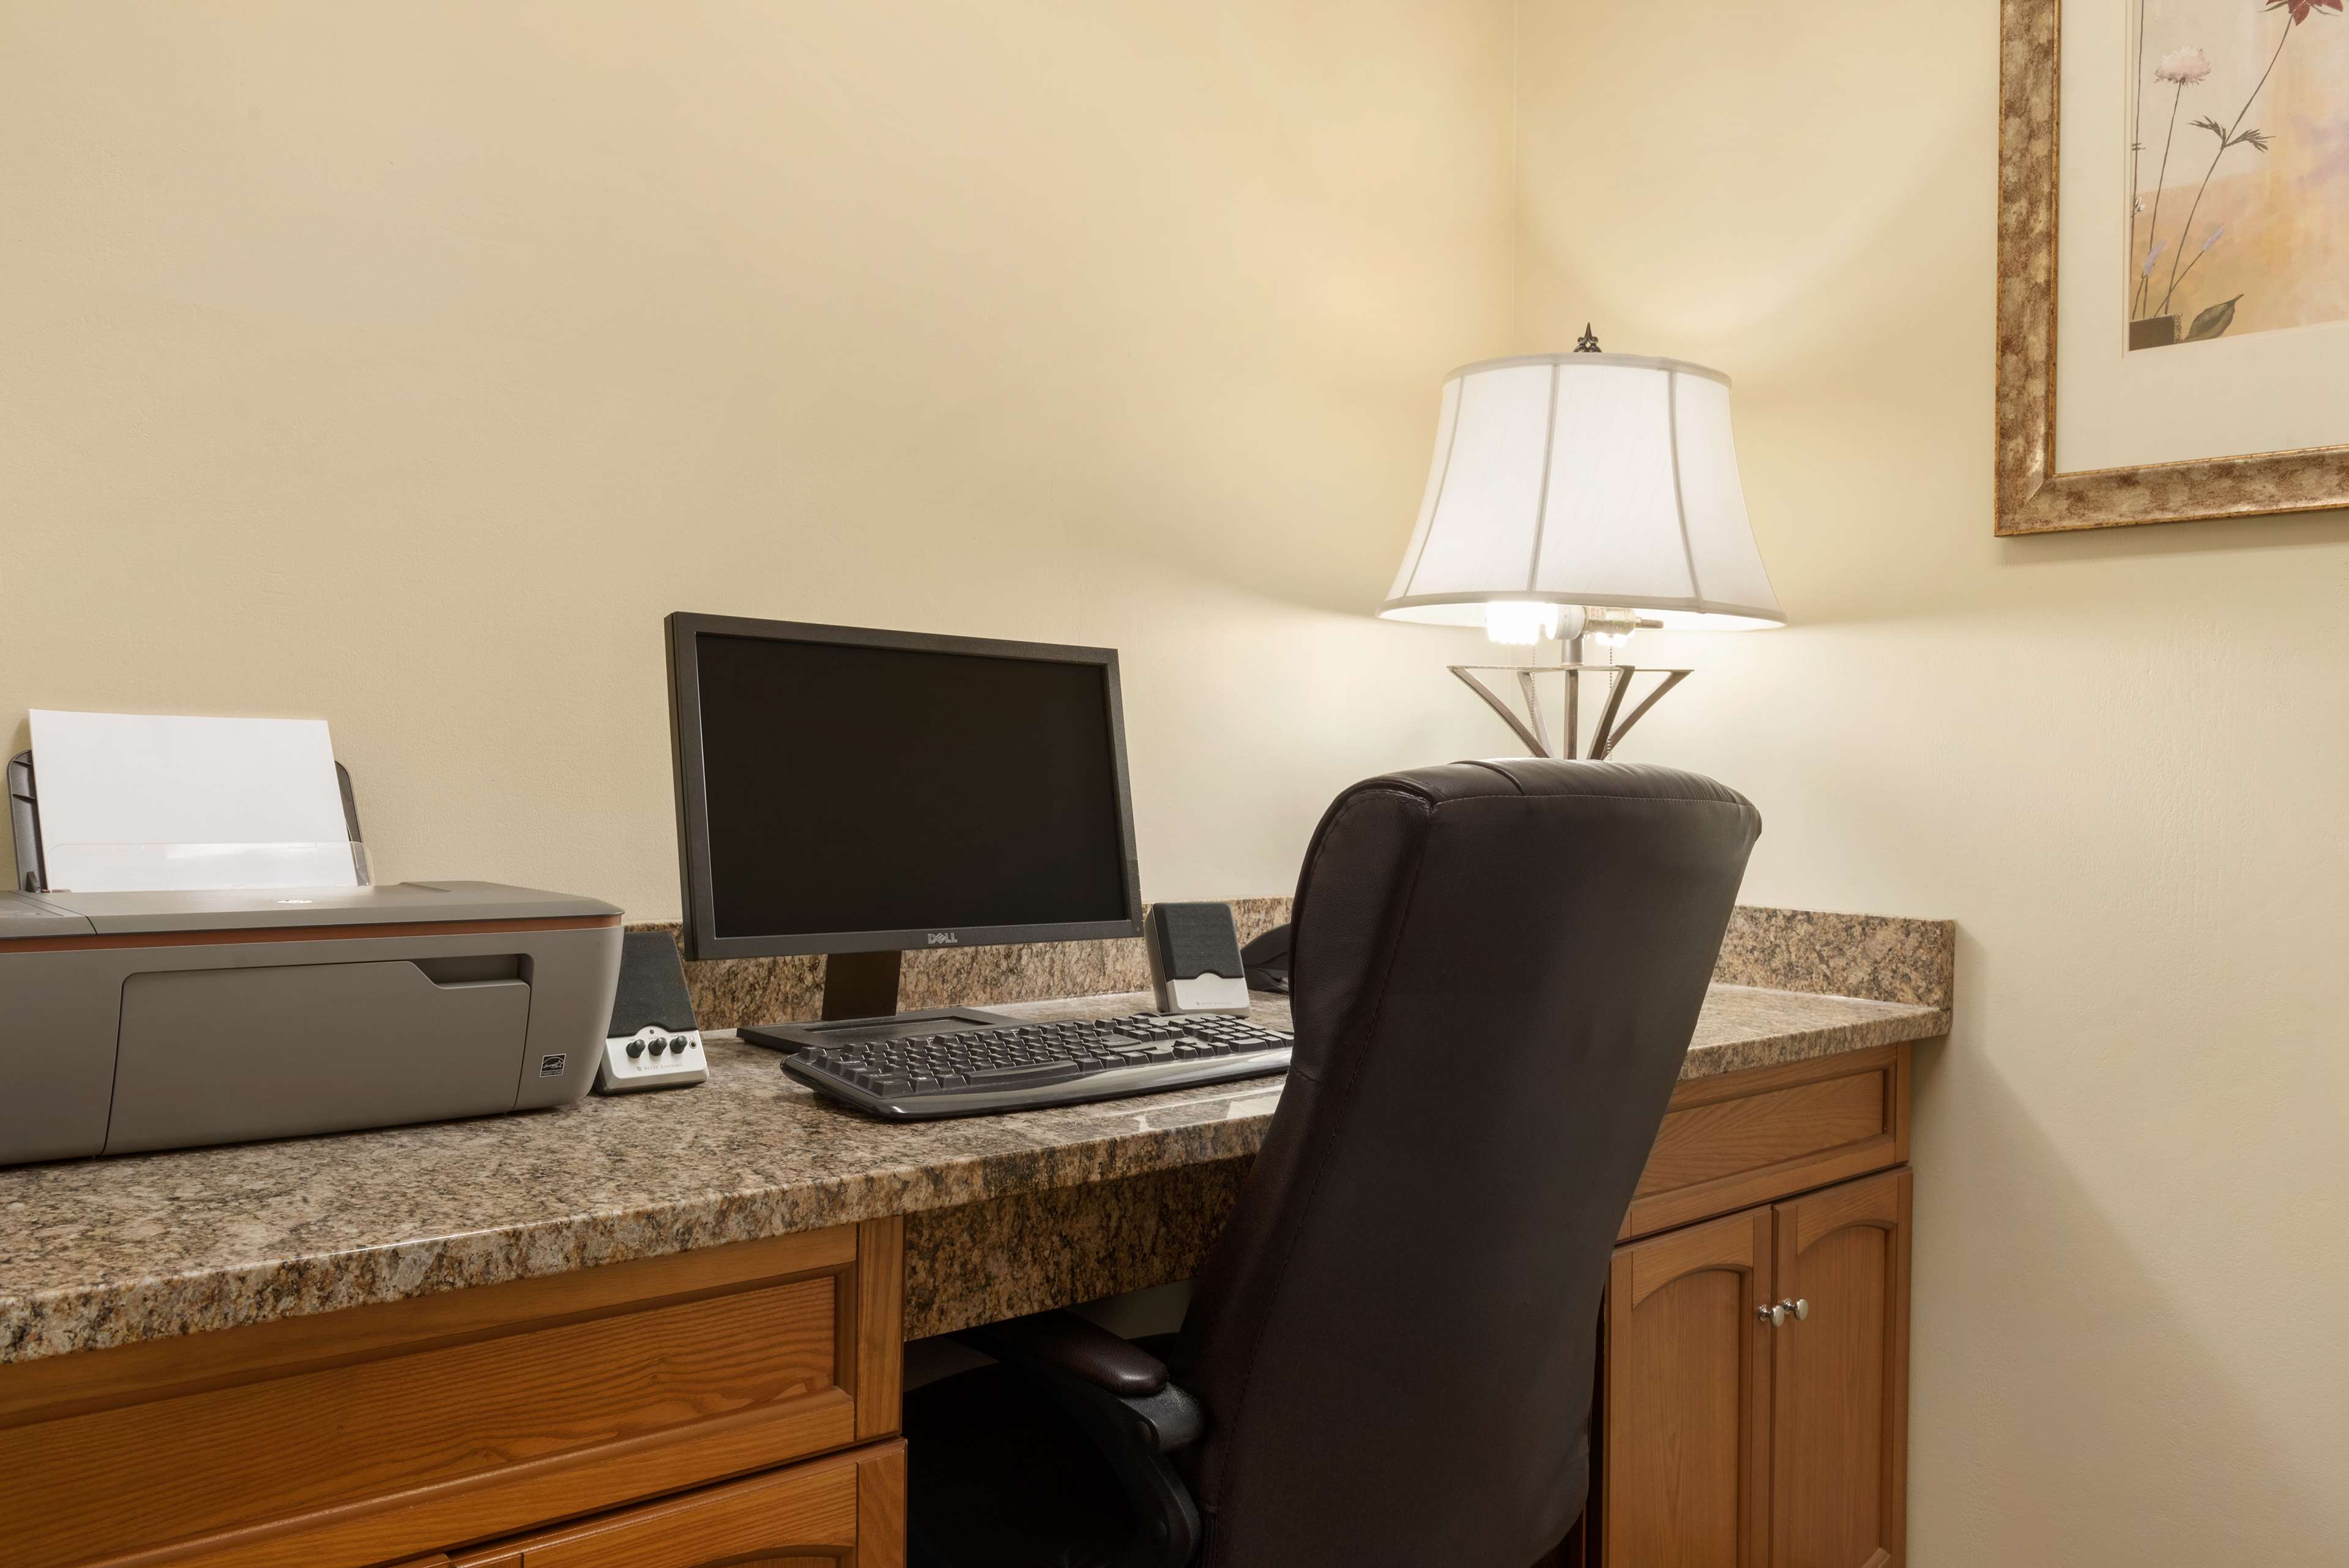 Country Inn & Suites by Radisson, Moline Airport, IL Photo